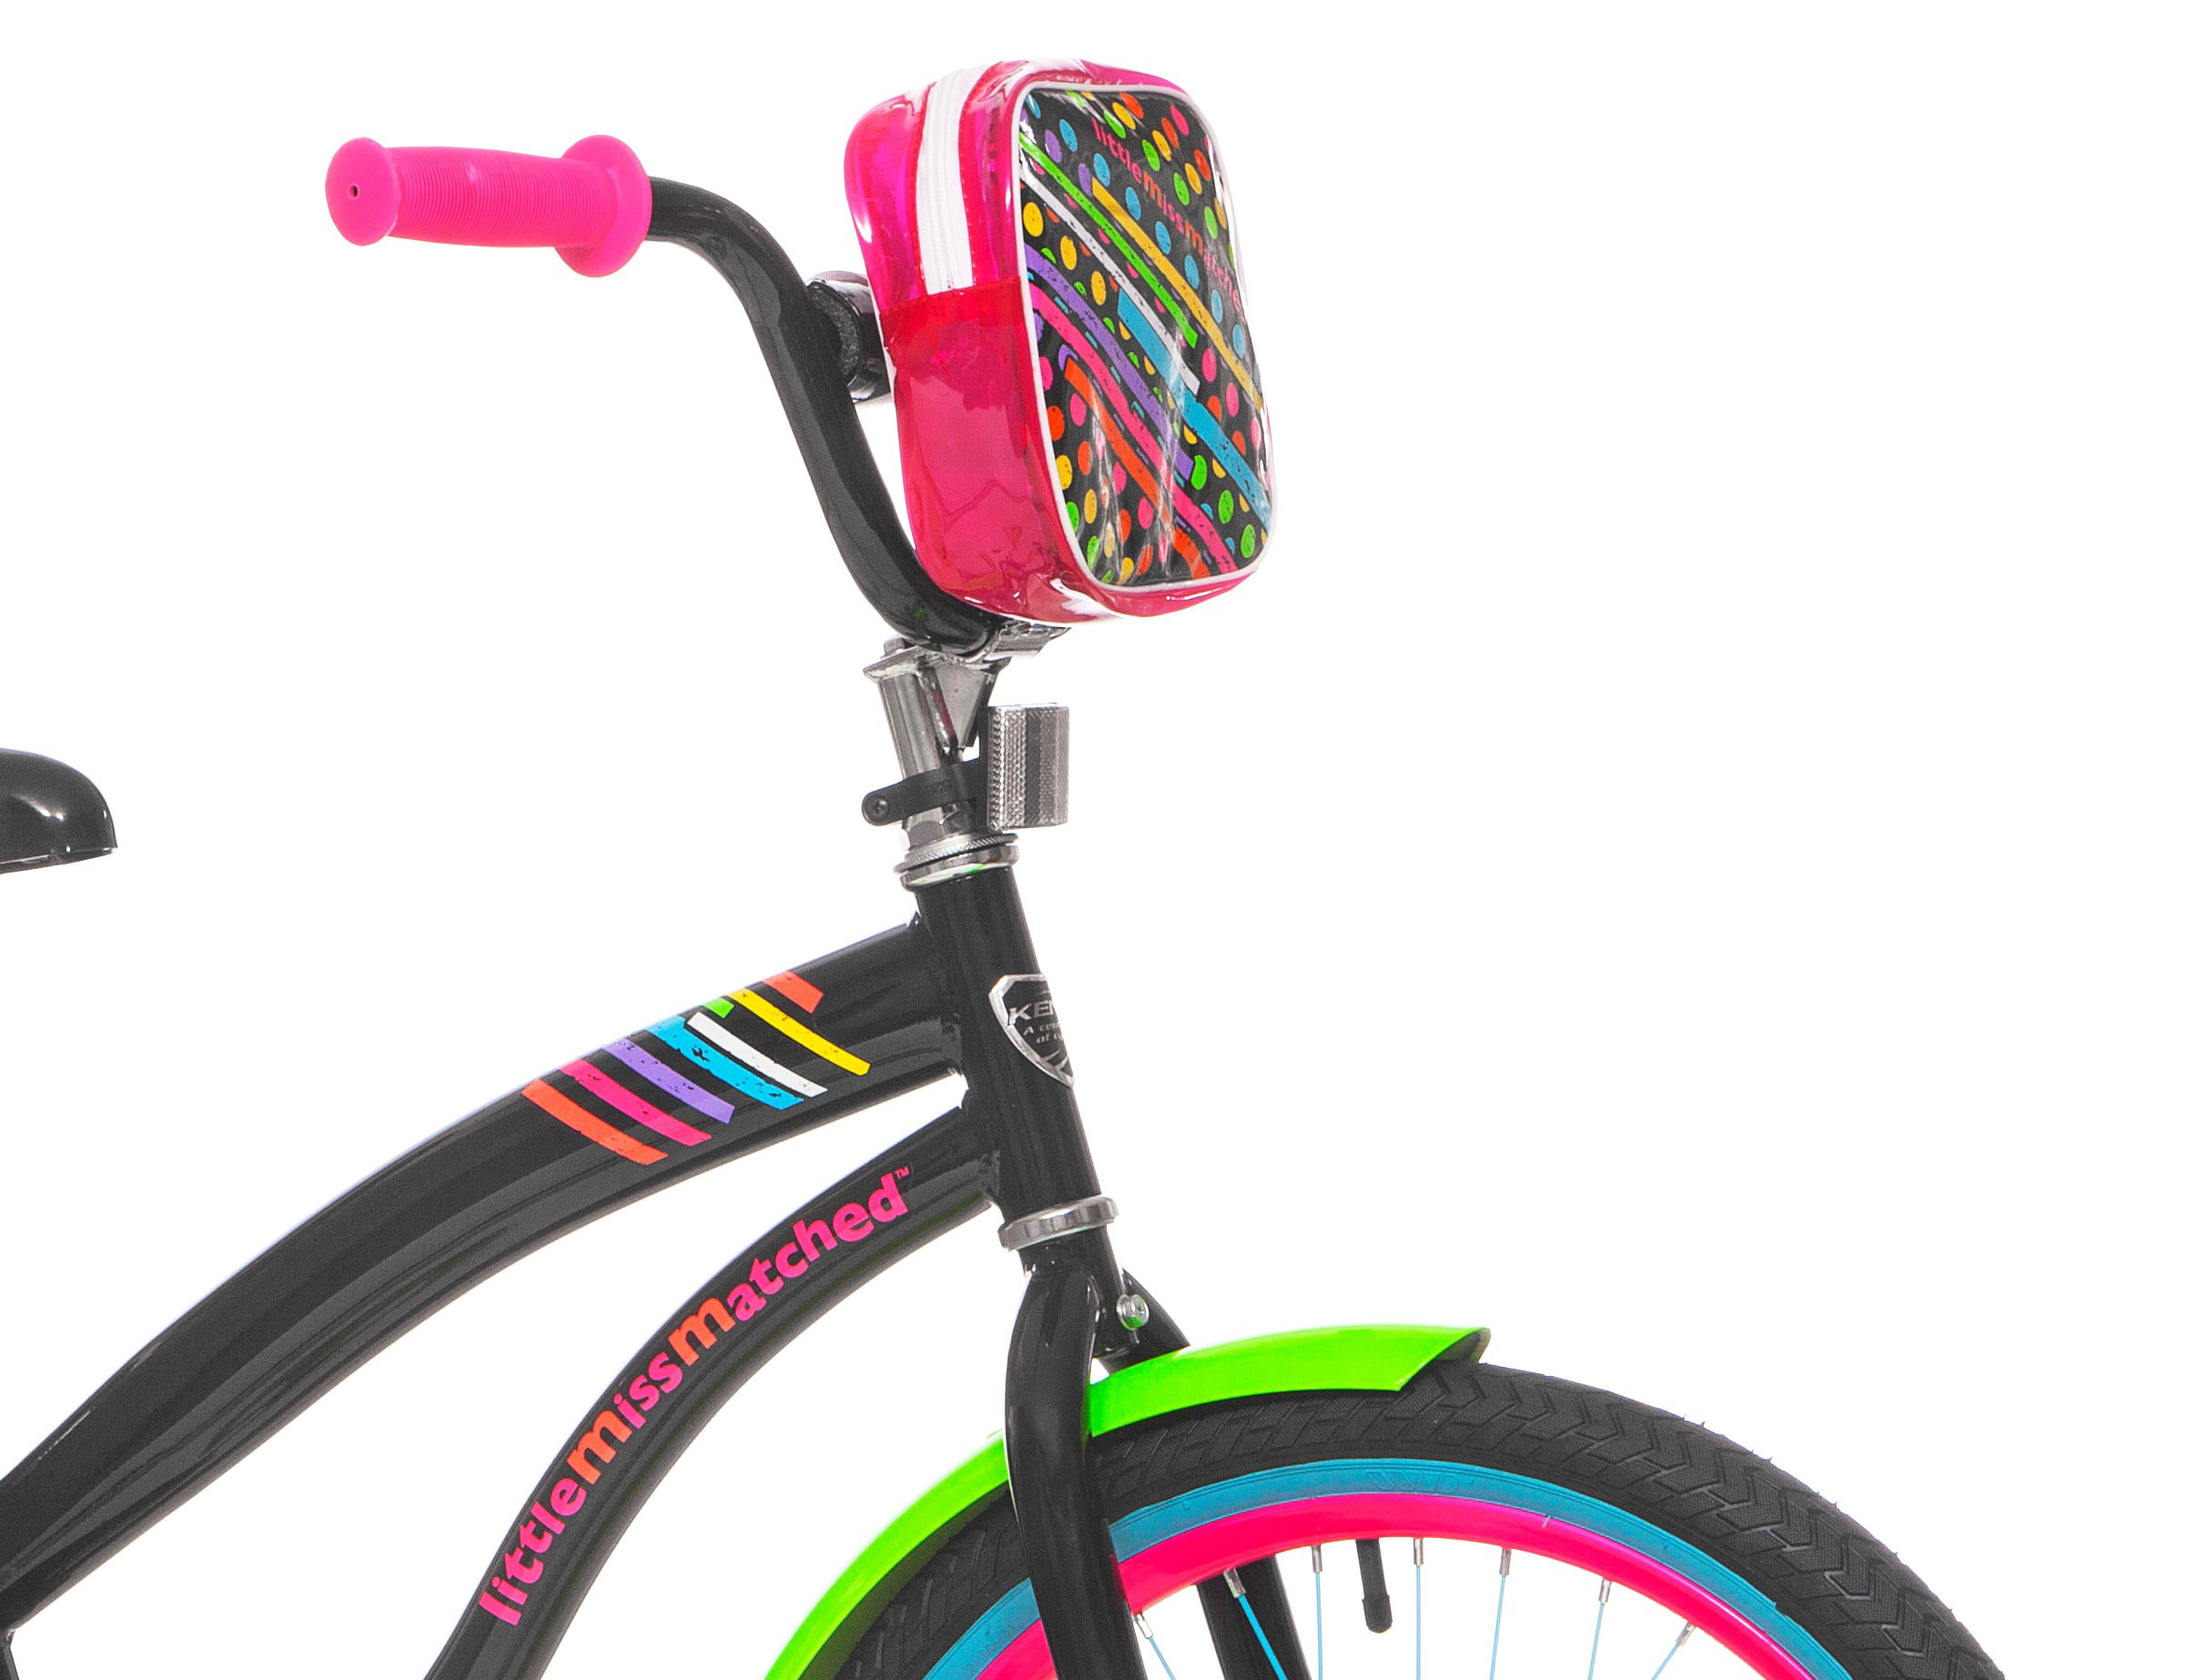 Let Kids Ride in Sweet Style with Bright,Eye Catching LittleMissMatched 20 Girls Bike,Multi-Color,with Rear Brakes,BMX Style Handlebars,an Adjustable Seat,and a Mounted Carry Bag,for Ages 8-12